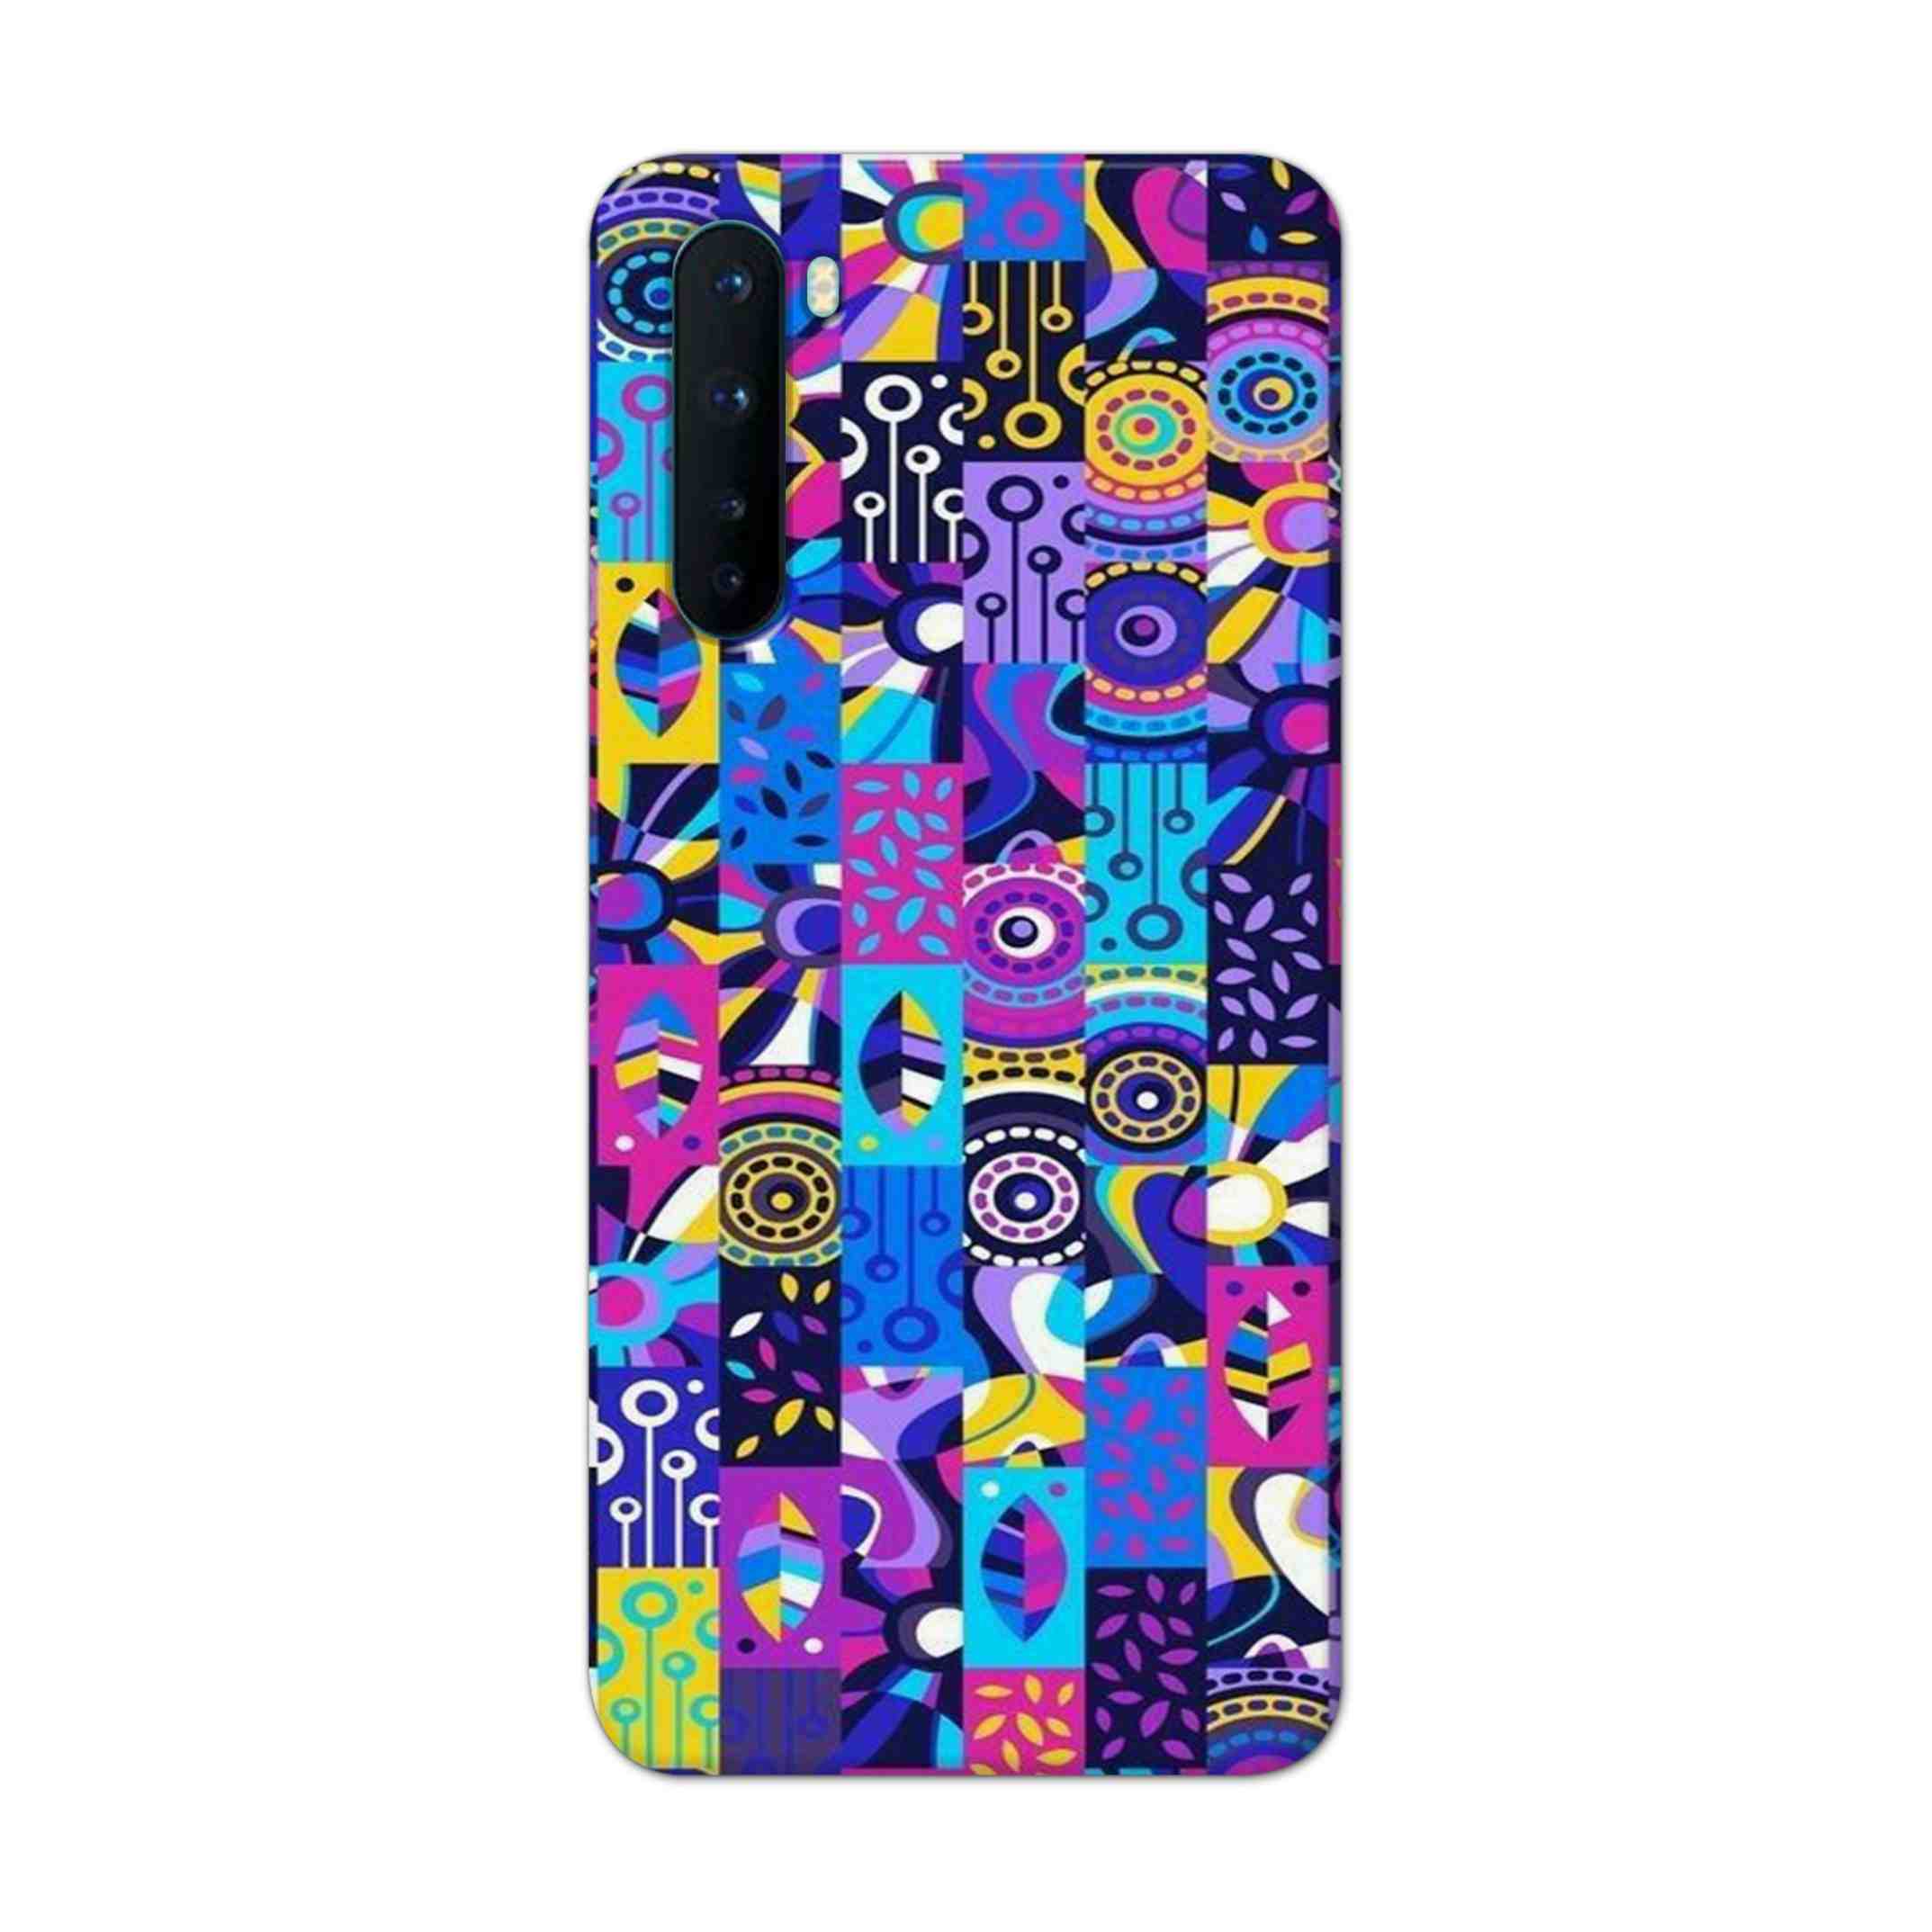 Buy Rainbow Art Hard Back Mobile Phone Case Cover For OnePlus Nord Online